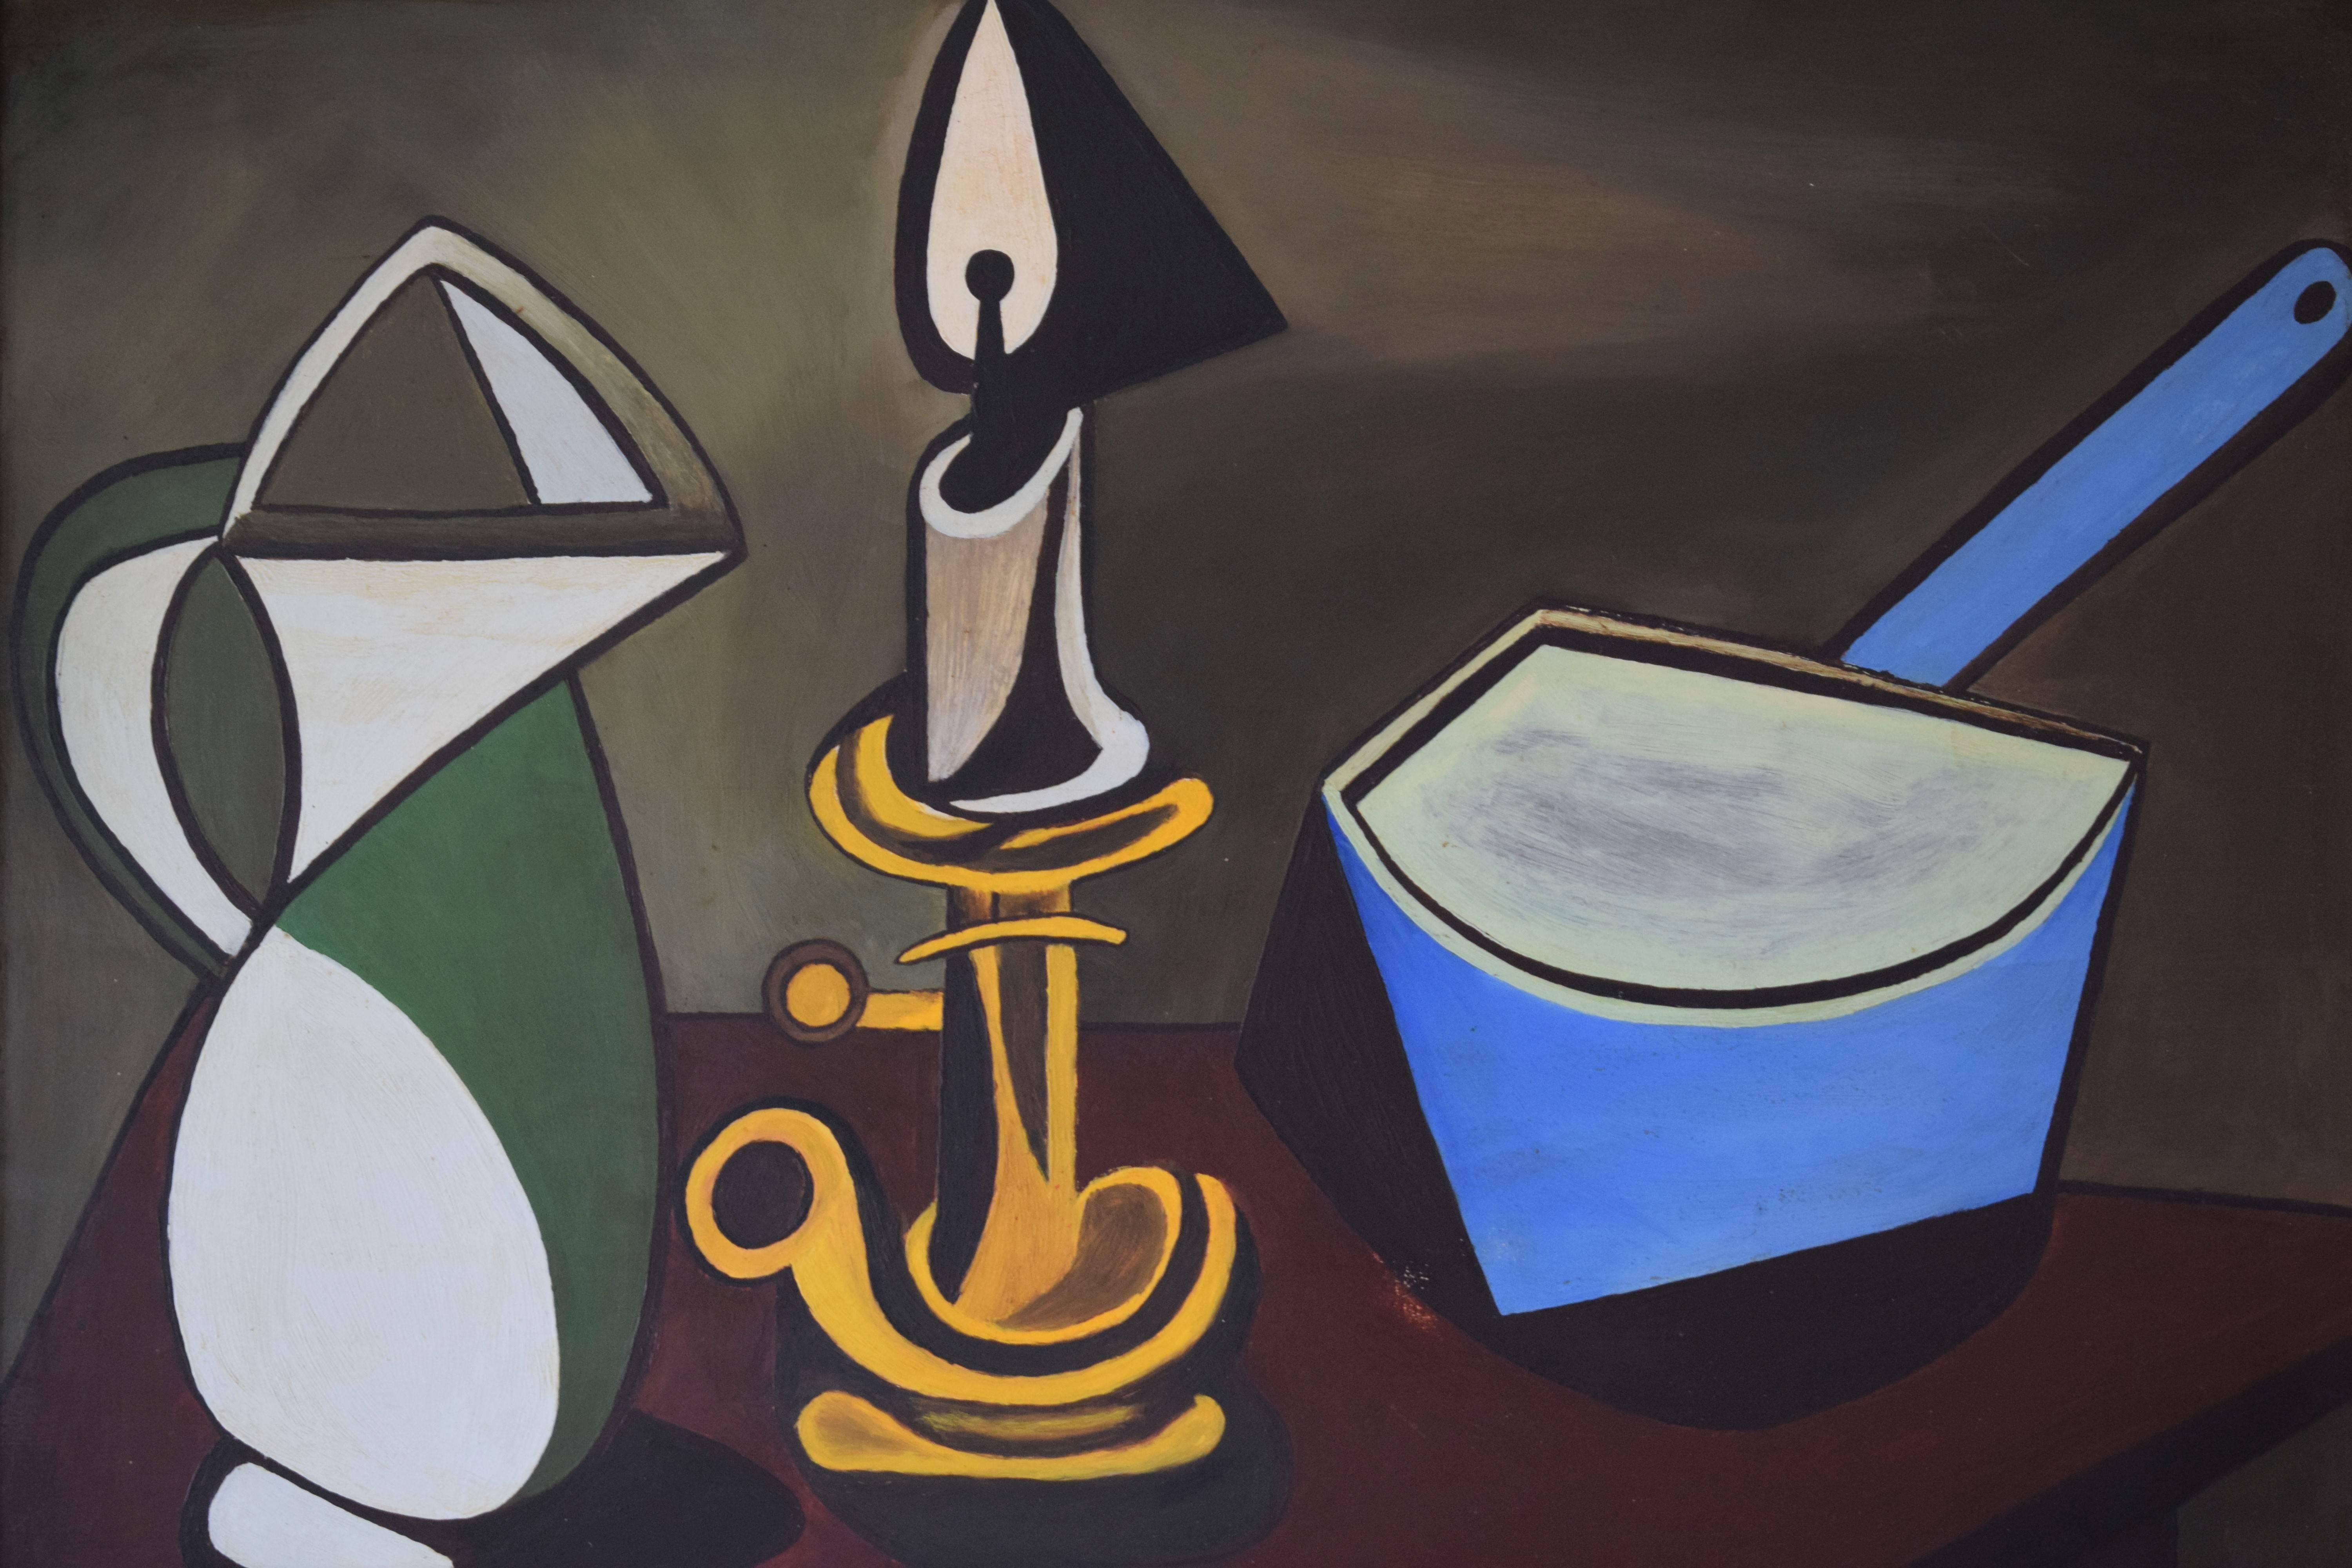 Mid-Century Modern, cubist arrangement with jug, candlestick and casserole. Unknown artist, oil on Masonite plate, original wooden frame.
Dimensions: D x W x H / 1.6 in x 25.6 in x 20.1 in / 4 cm x 65 cm x 51 cm.